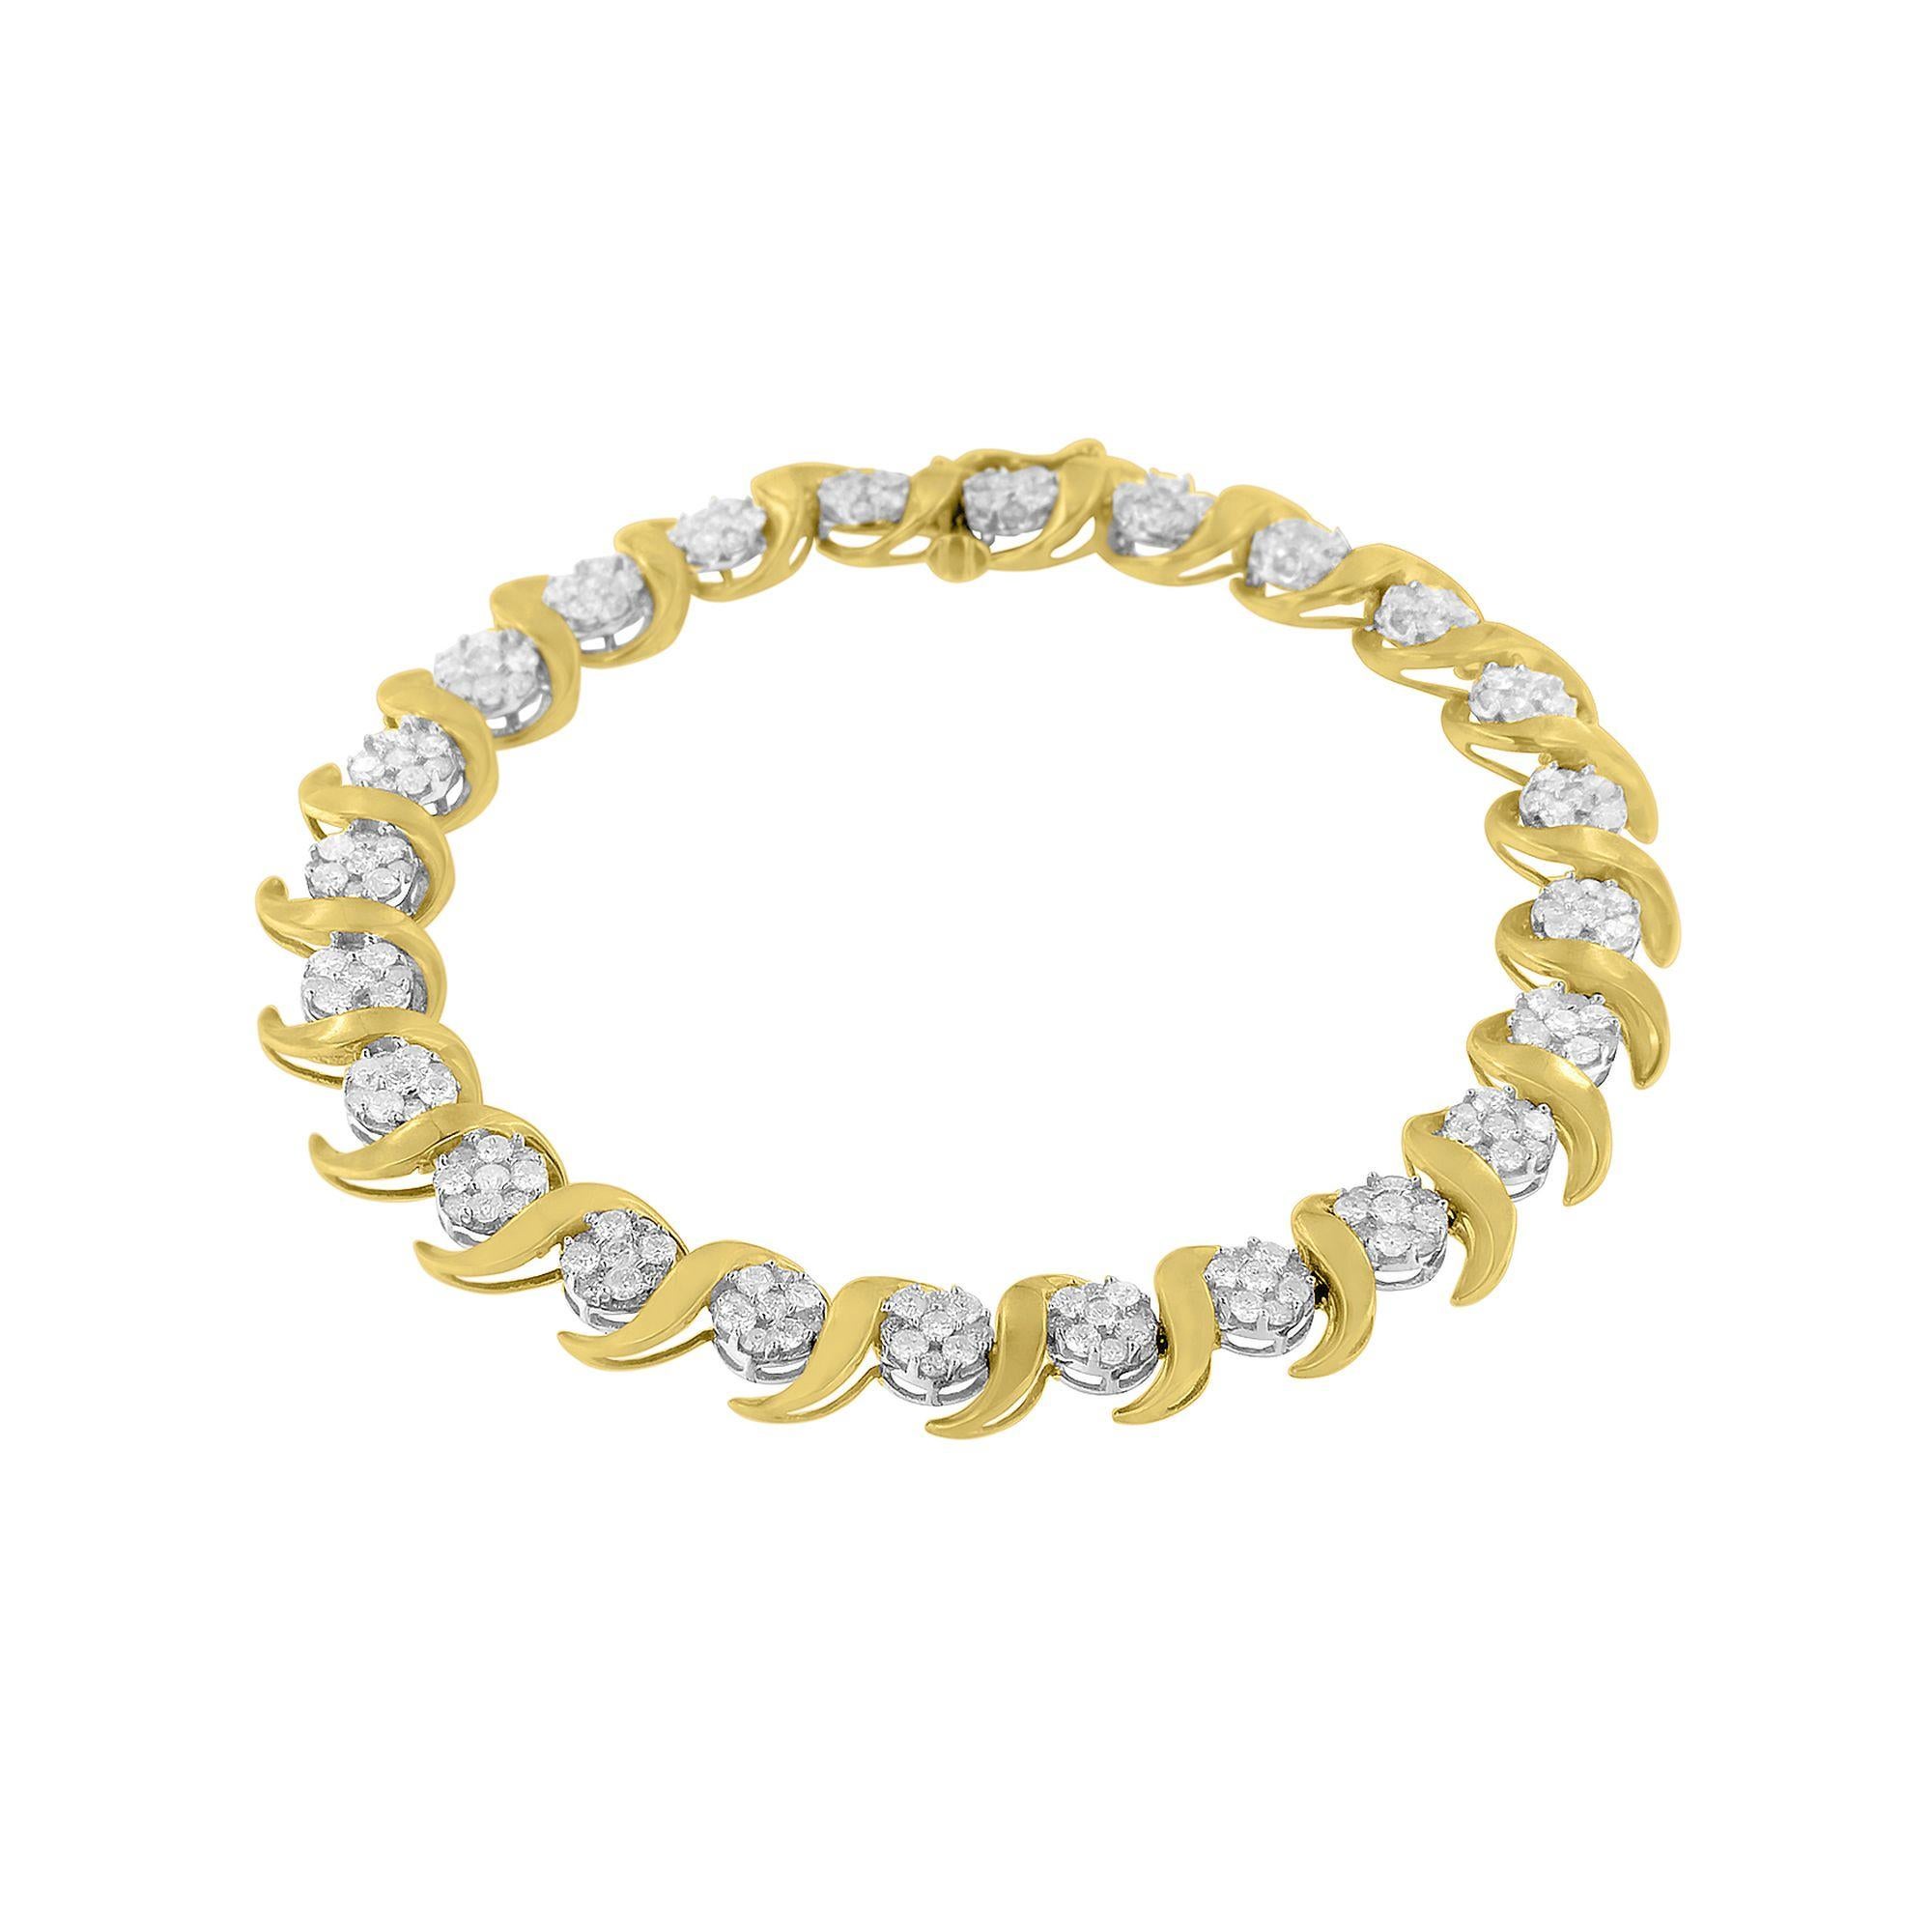 Introducing a dazzling masterpiece that perfectly captures the essence of elegance and femininity - a 10K Yellow Gold Diamond Floral Link Bracelet. Crafted with utmost precision and adorned with 216 exquisite round-cut diamonds, this bracelet is a